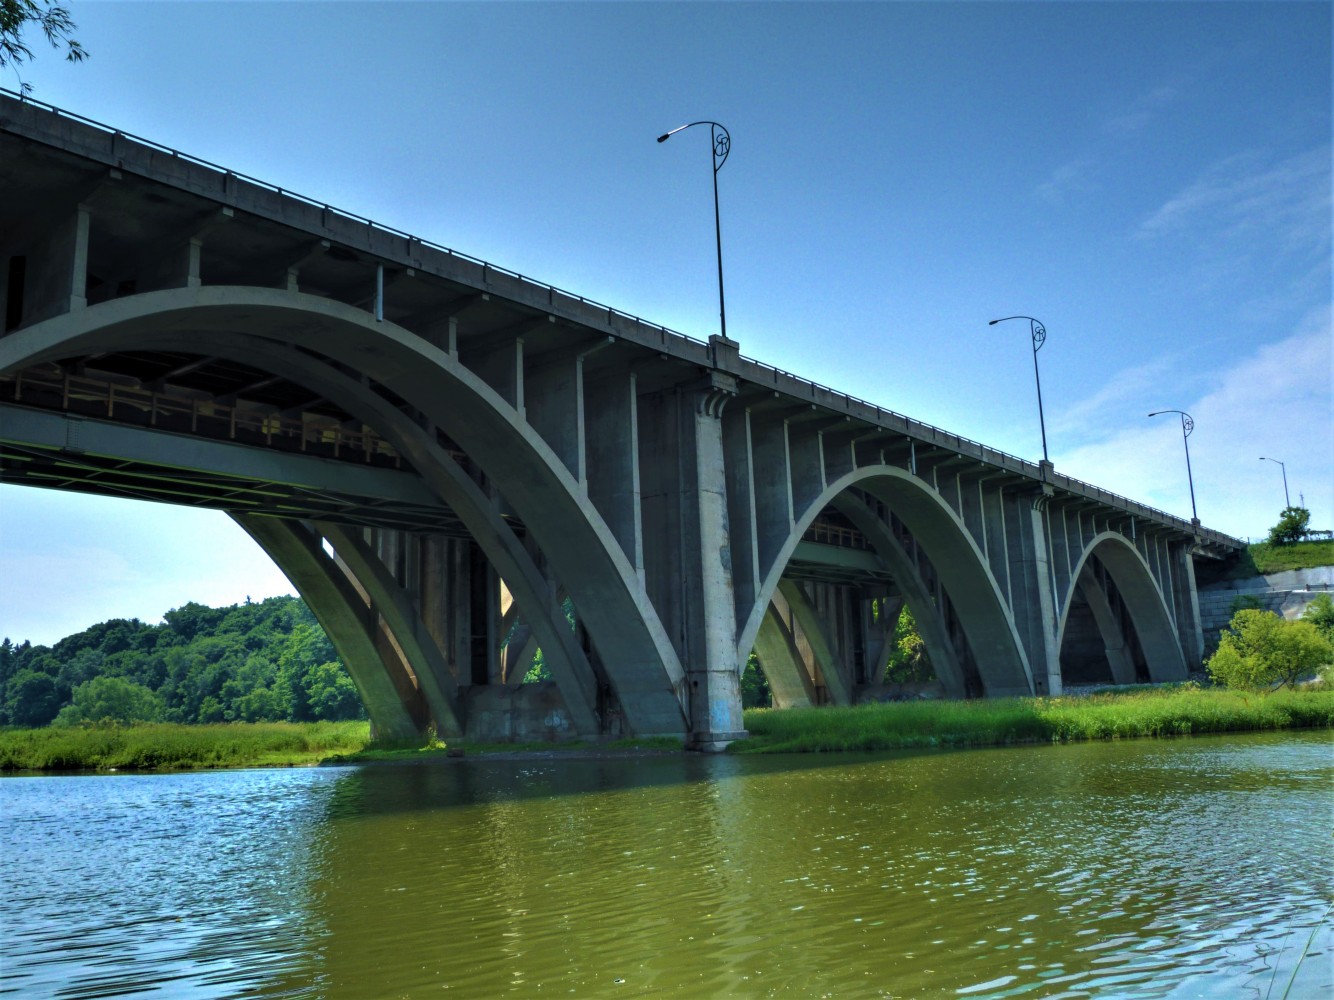 Ford government wants to reduce public involvement that saved QEW Credit River bridge